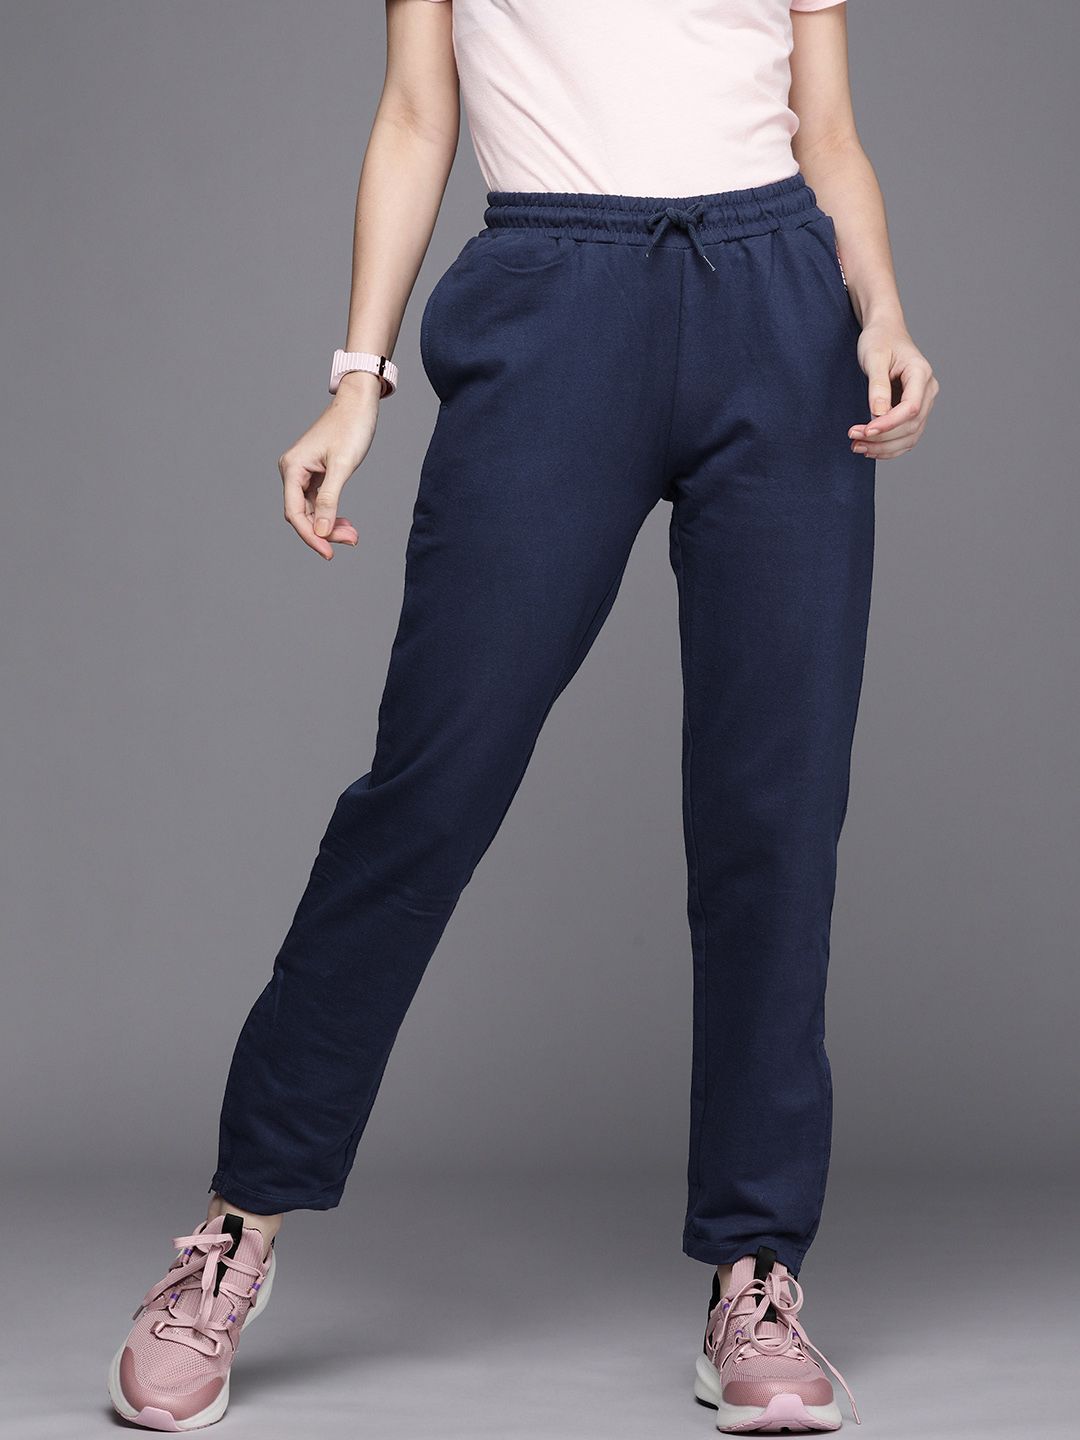 Allen Solly Woman Blue Solid Pure Cotton Regular Fit Mid-Rise Trousers Price in India